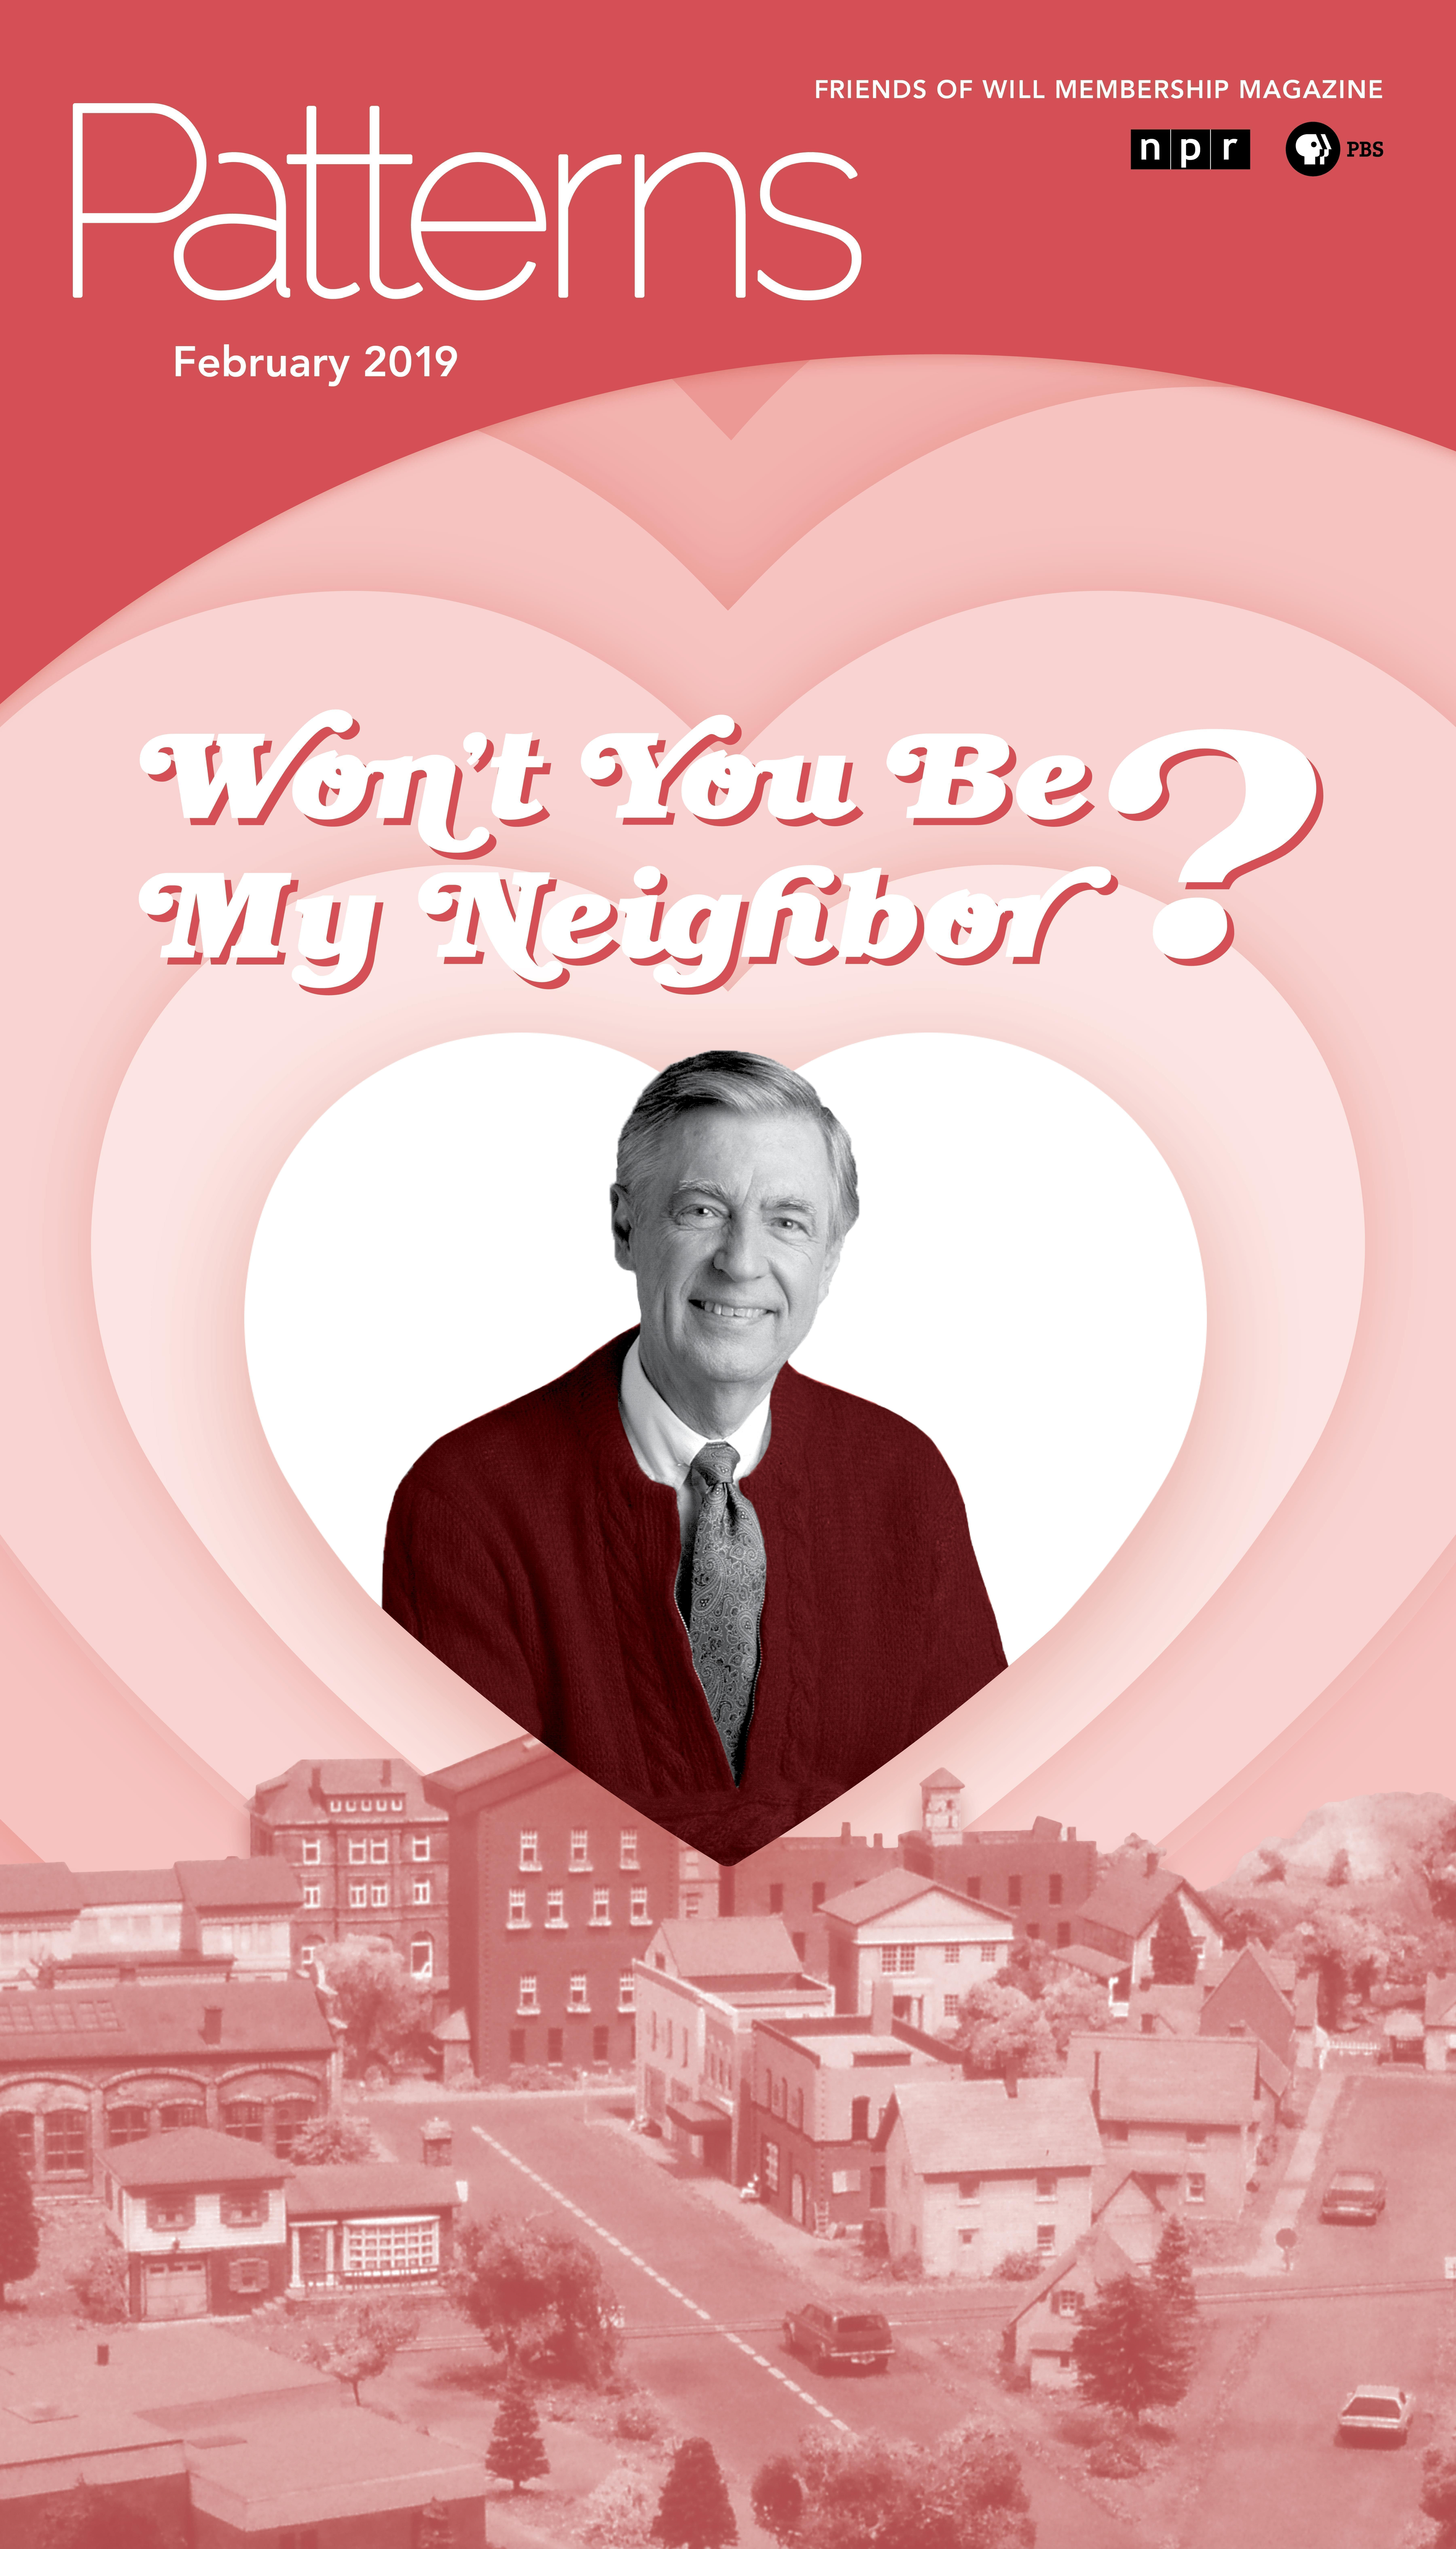 Won't you be my neighbor documentary on Mister Rogers